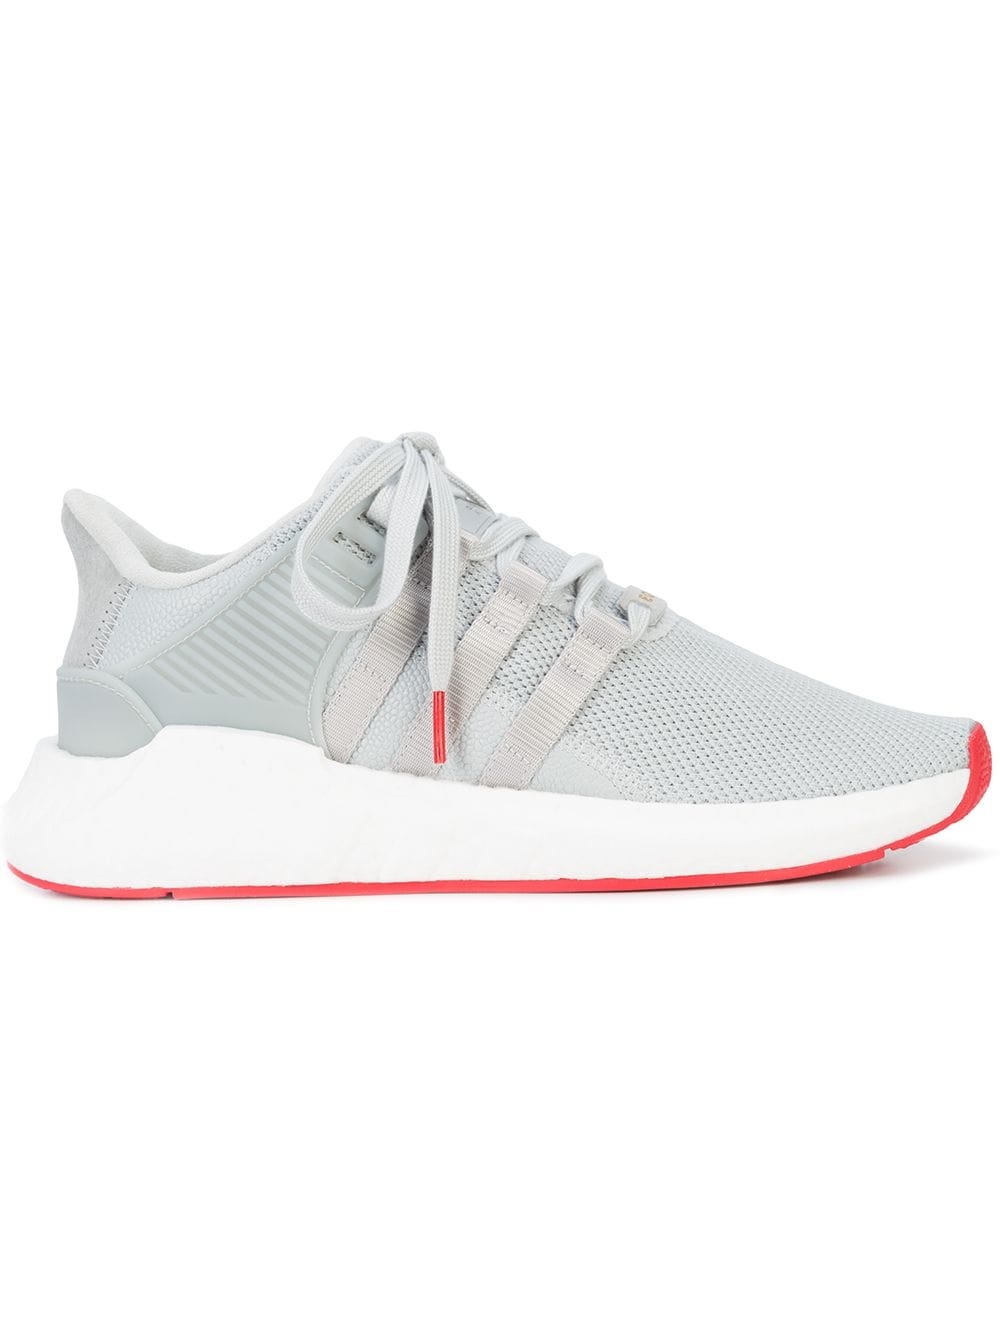 EQT Support 93/17 sneakers - 1